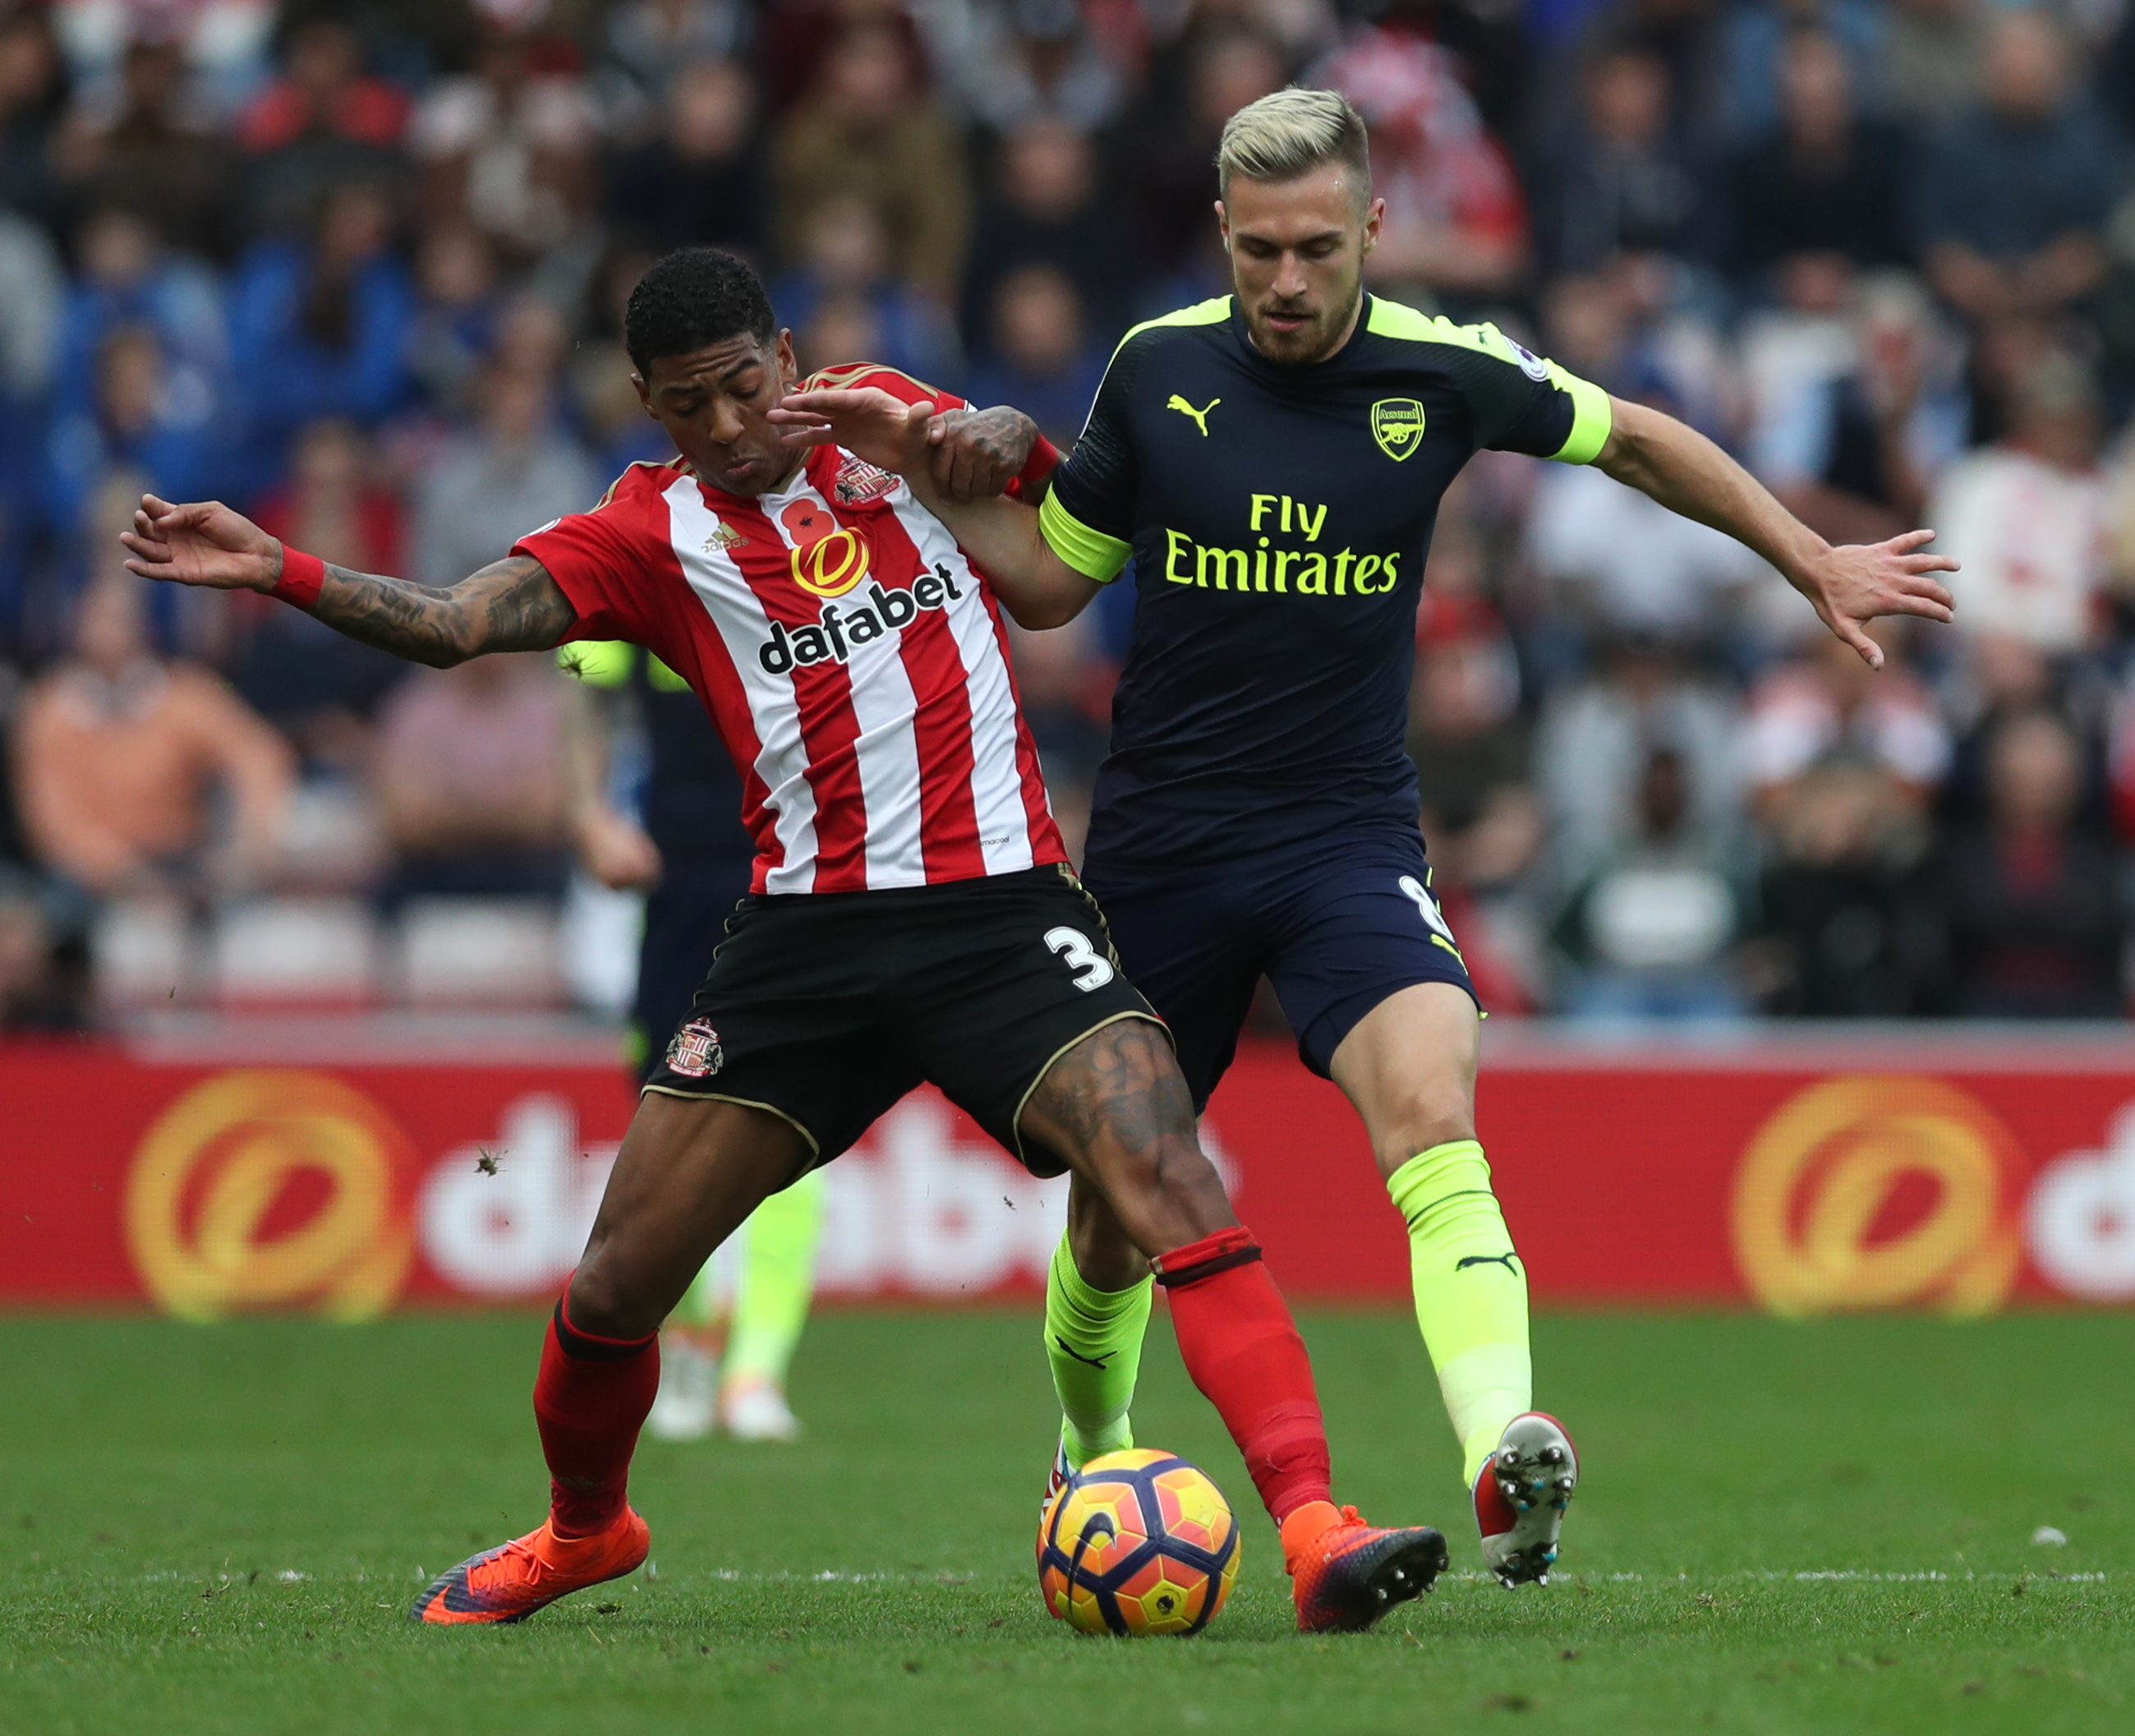 SUNDERLAND, ENGLAND - OCTOBER 29:  Aaron Ramsey of Arsenal vies with Patrick van Aanholt of Sunderland during the Premier League match between Sunderland and Arsenal at Stadium of Light on October 29, 2016 in Sunderland, England. (Photo by Ian MacNicol/Getty Images)